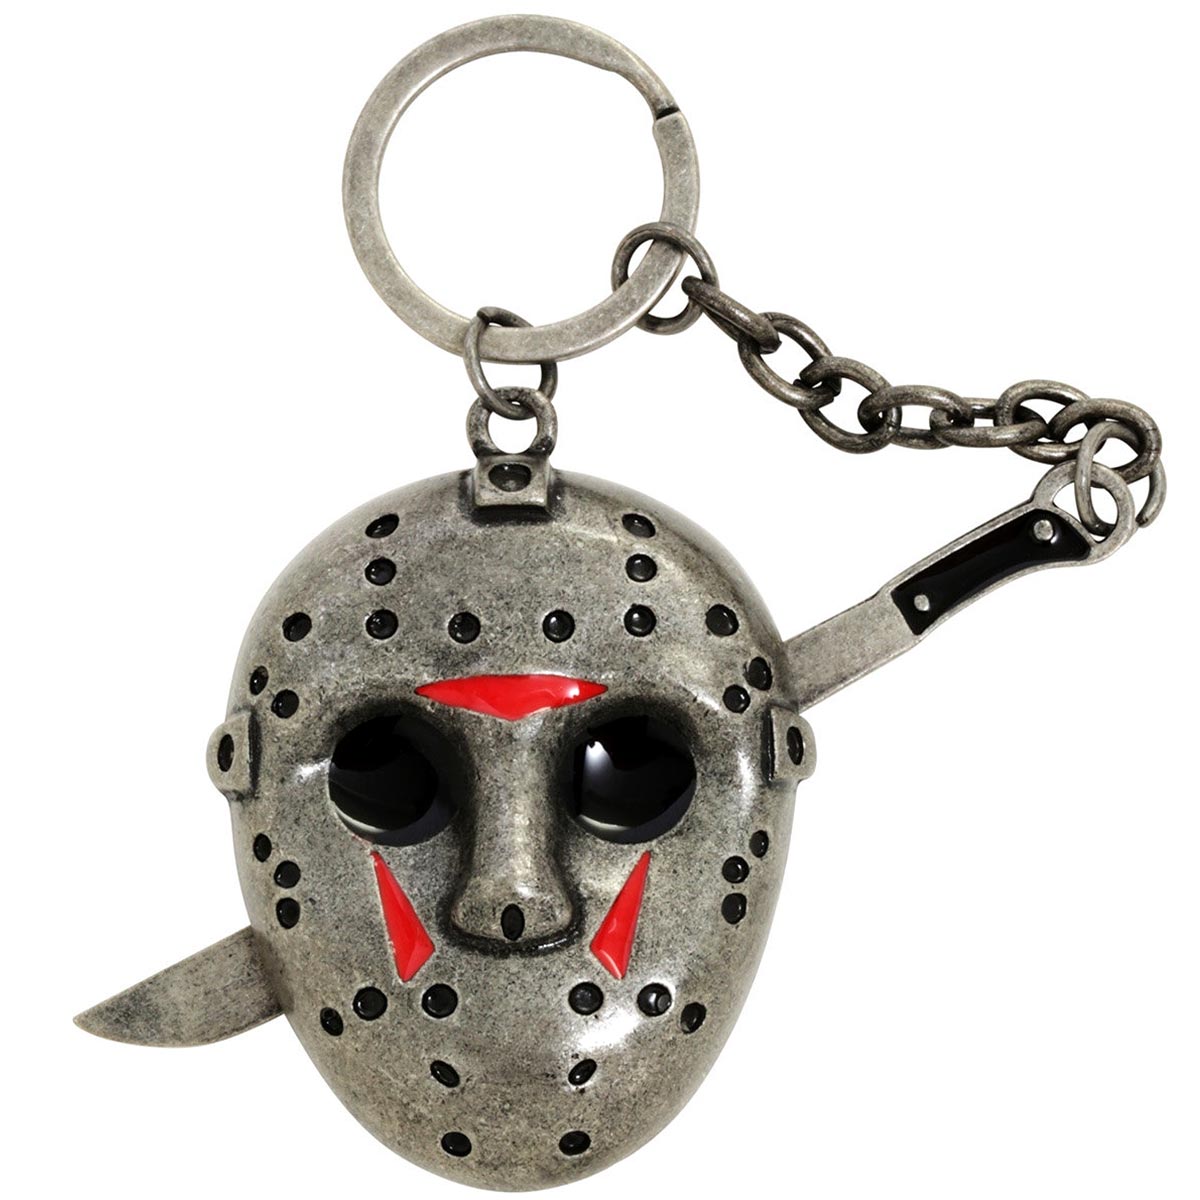 Friday the 13th keychain key chain jason voorhees Full metal mask is 2.7 inch 